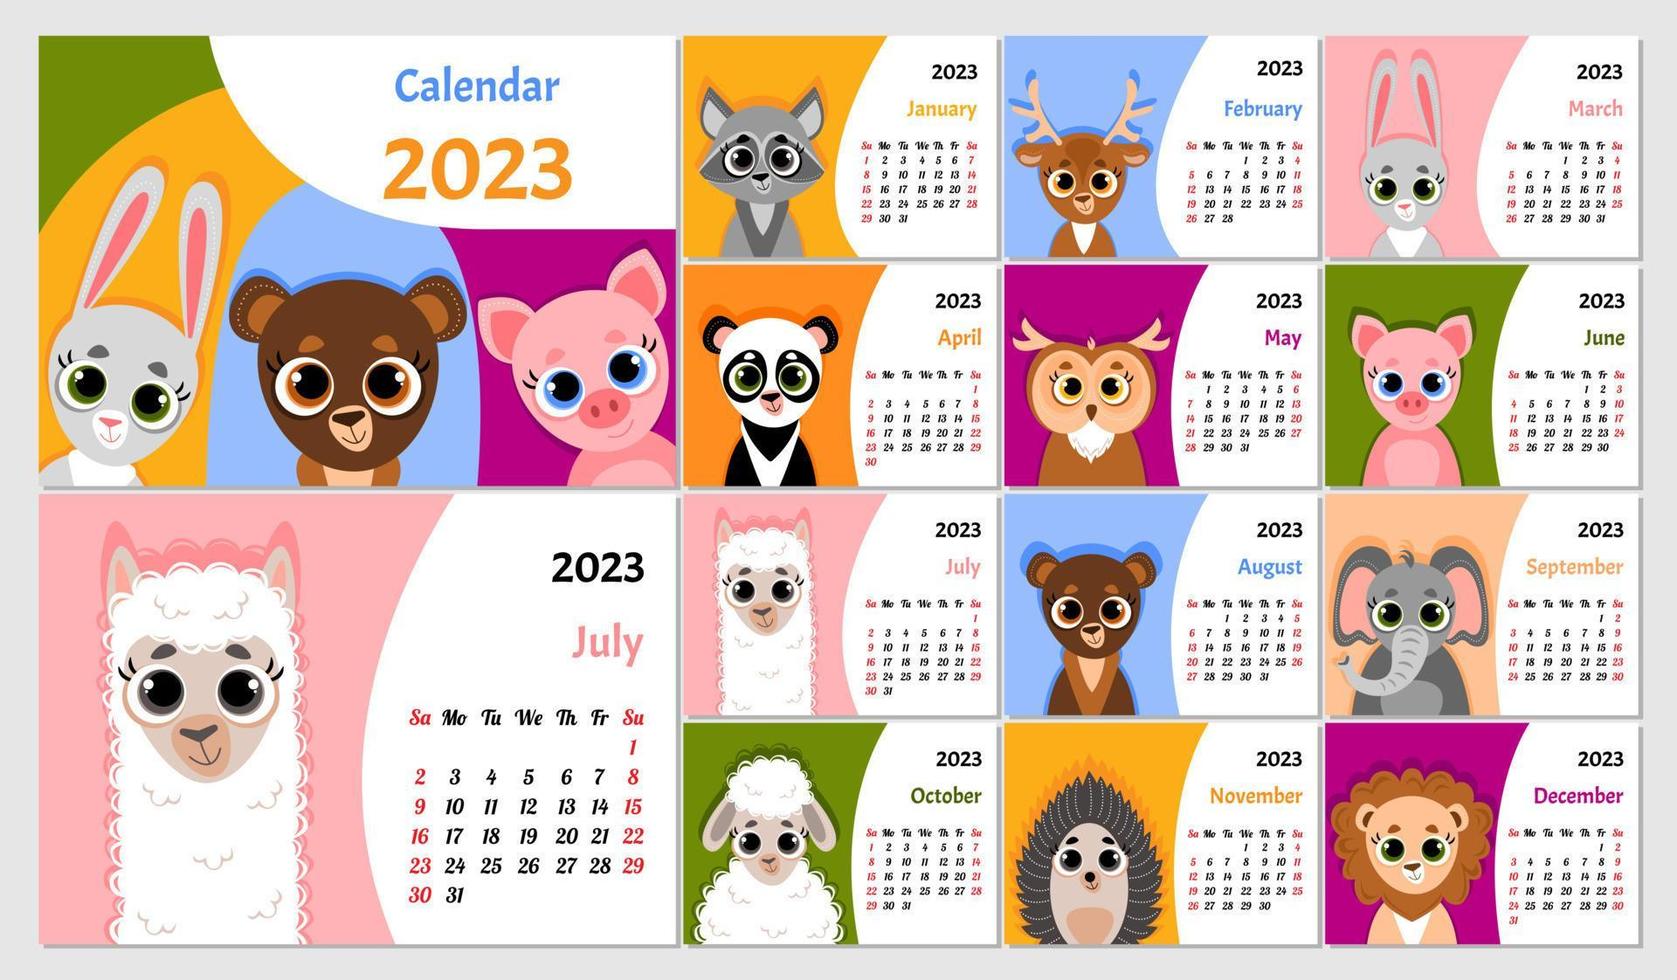 Calendar 2023 with cute animals. Cover and 12 month's pages . Week starts on Sunday. vector